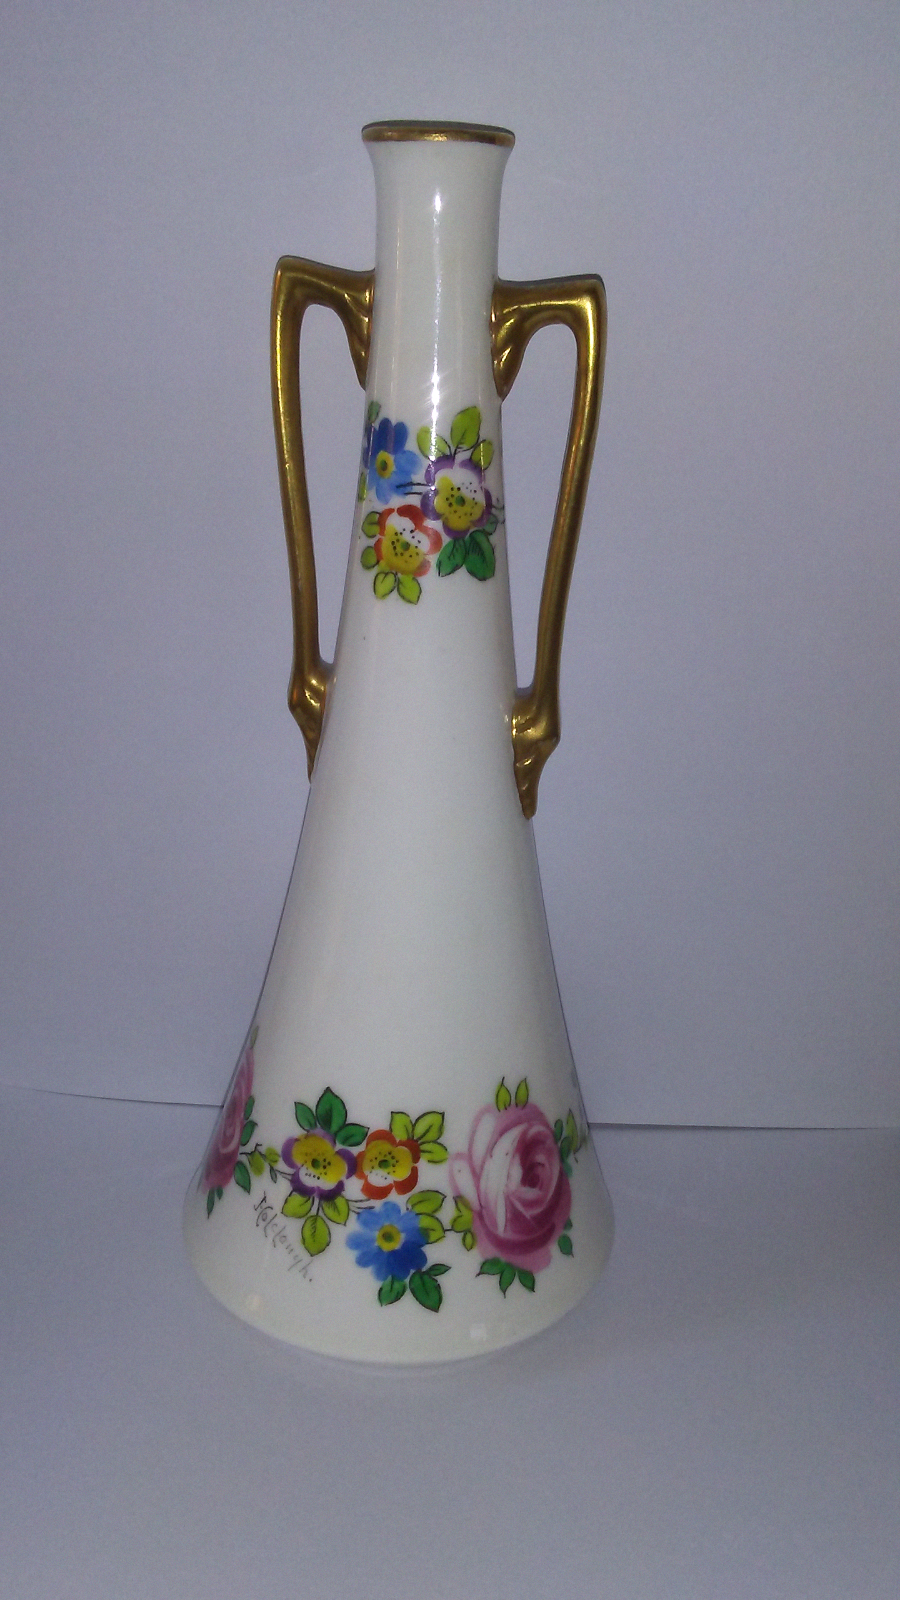 Very Rare Minton Secessionist Vase, 7" high 3" at base